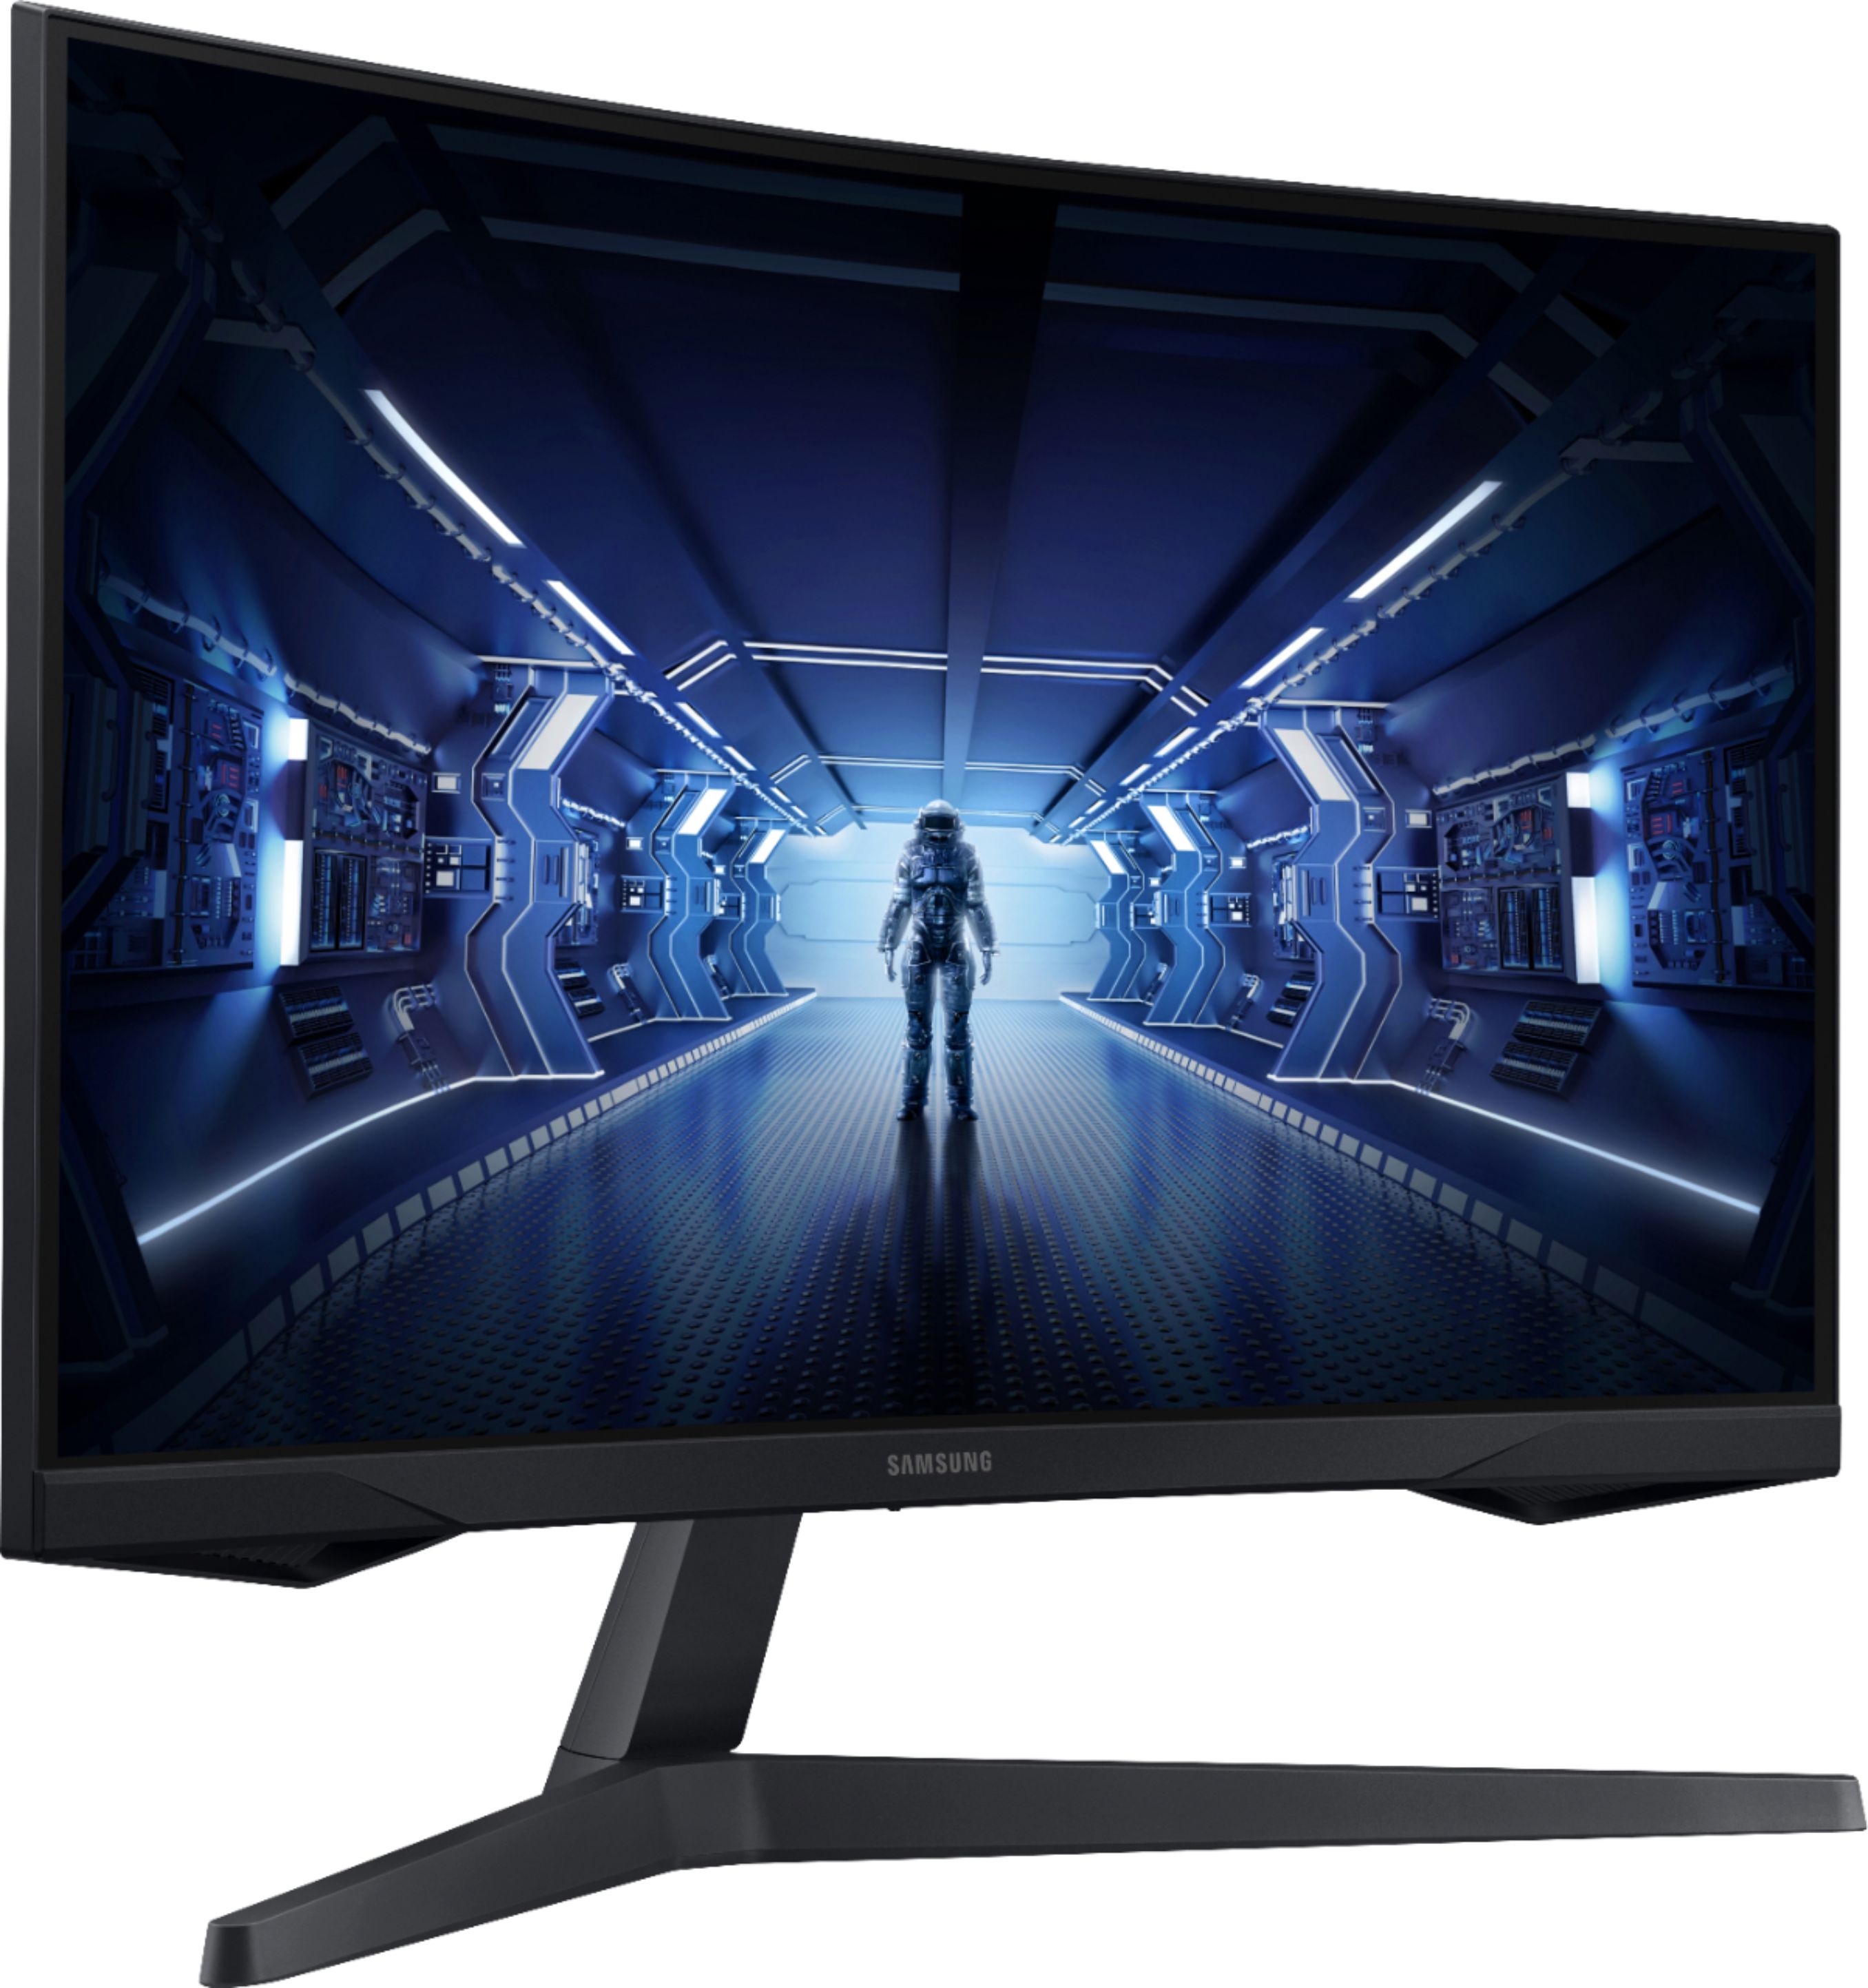 Angle View: Samsung - Geek Squad Certified Refurbished Odyssey Neo 49" LED Curved FreeSync and G-SYNC Compatable Monitor with HDR - Black